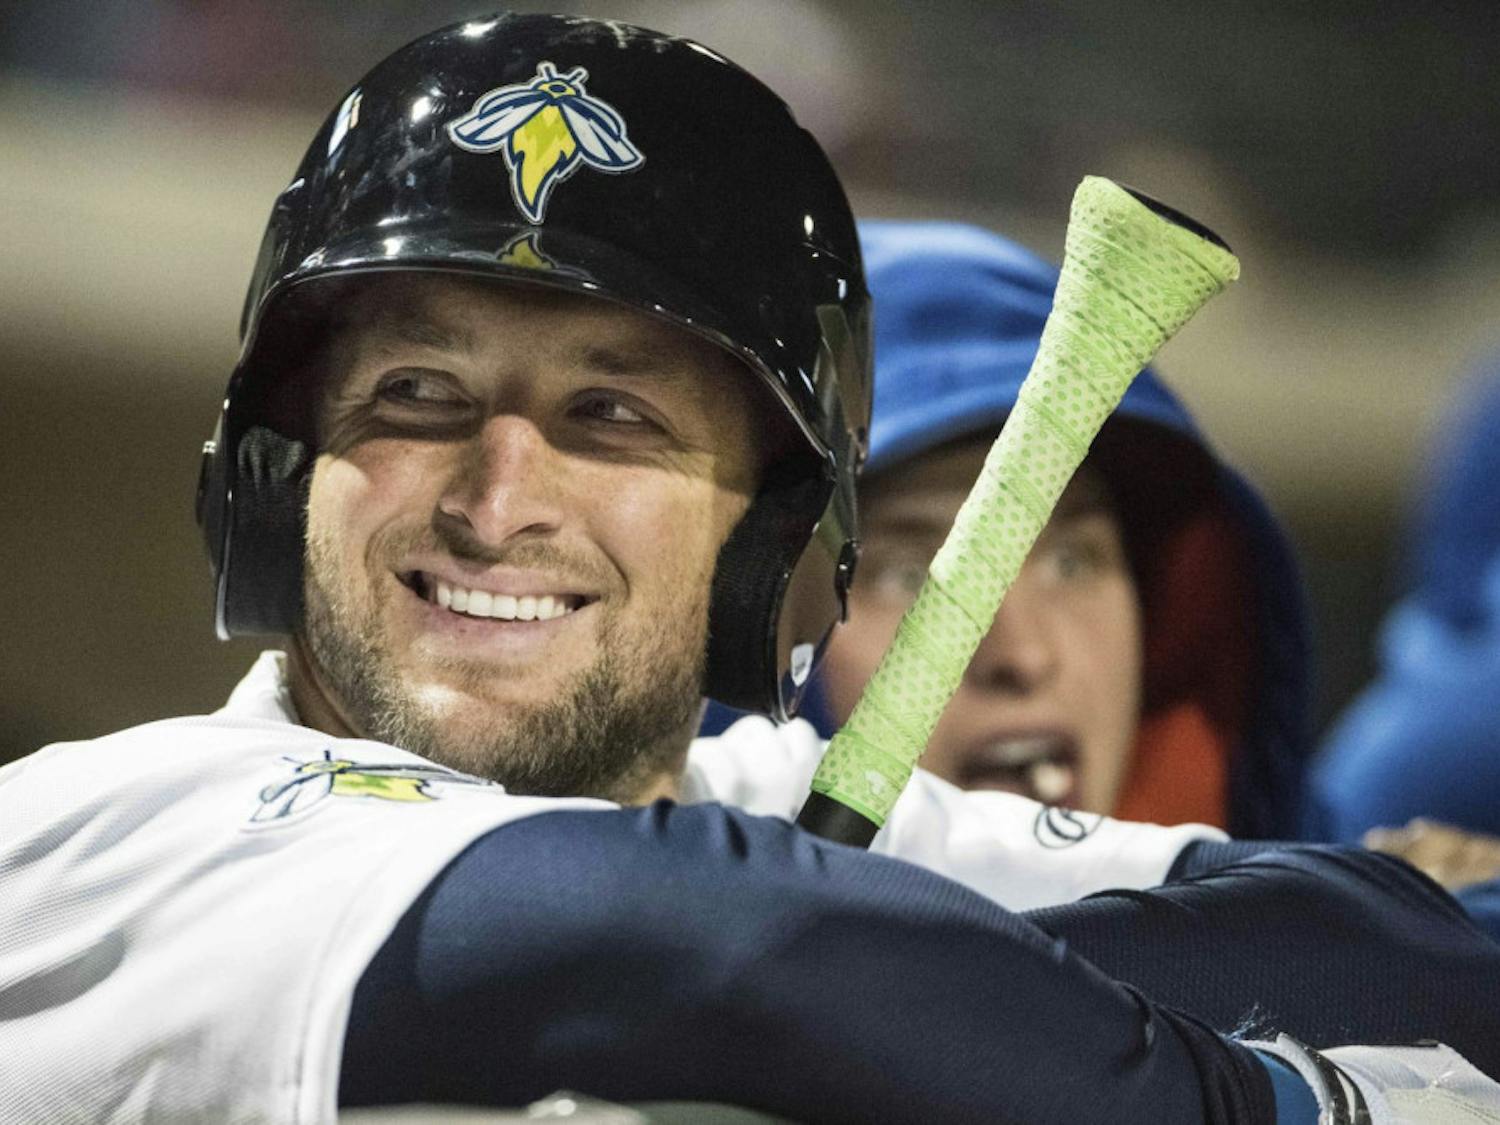 Columbia Firefly outfielder Tim Tebow shares a smile with fans during a Class A minor league baseball game against the Augusta GreenJackets on Thursday, April 6, 2017, in Columbia, S.C. Columbia defeated Augusta 14-7. (AP Photo/Sean Rayford)